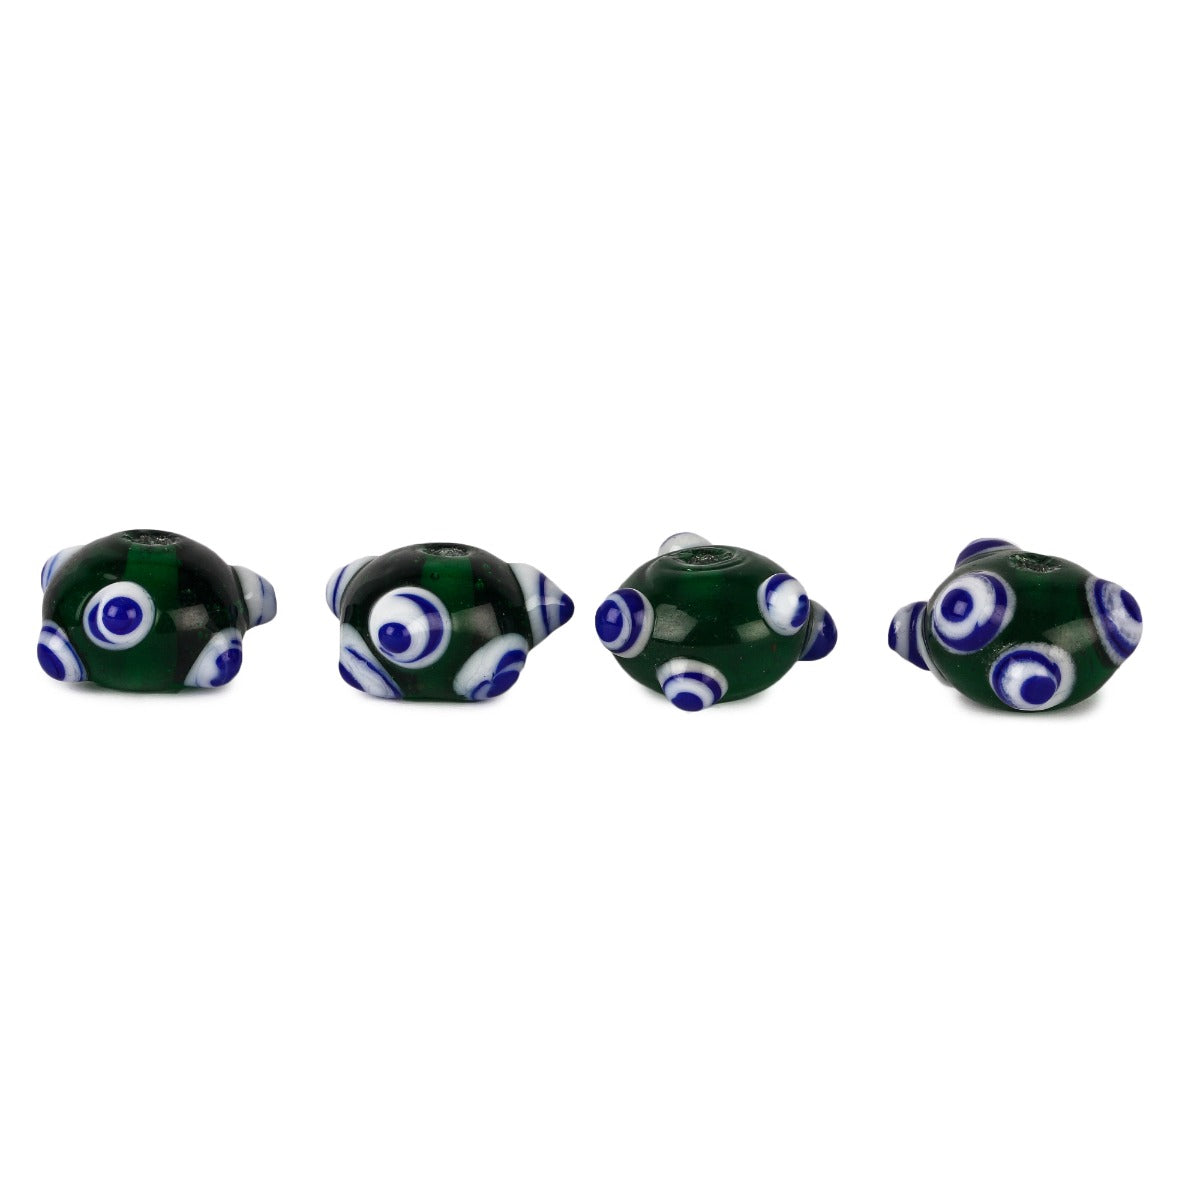 Blue glass bead with eyes